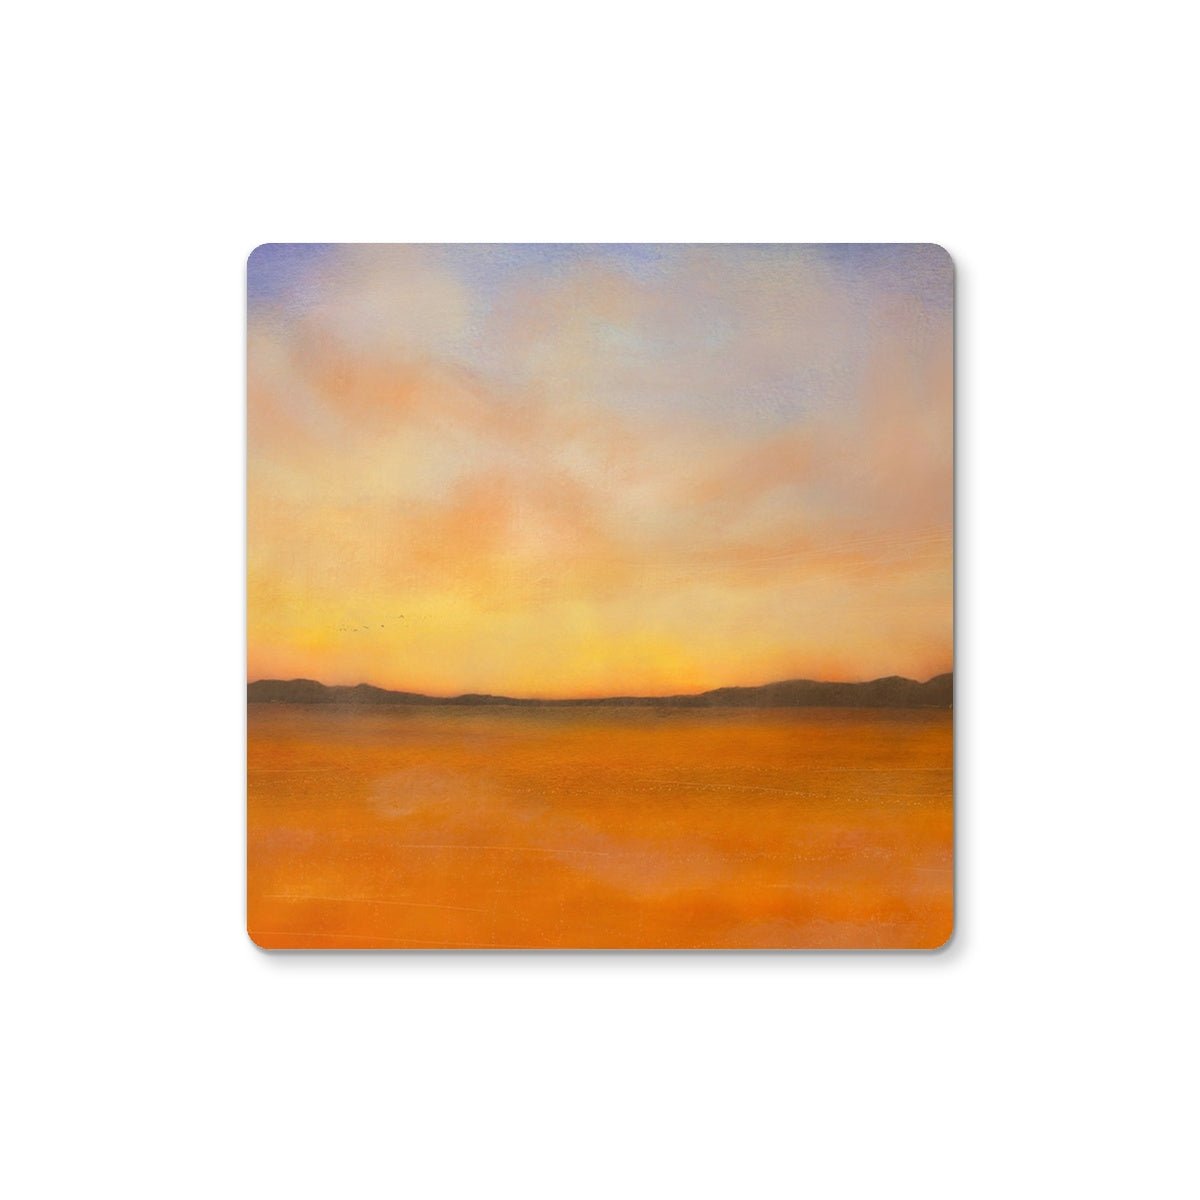 Islay Dawn Art Gifts Coaster-Coasters-Hebridean Islands Art Gallery-2 Coasters-Paintings, Prints, Homeware, Art Gifts From Scotland By Scottish Artist Kevin Hunter